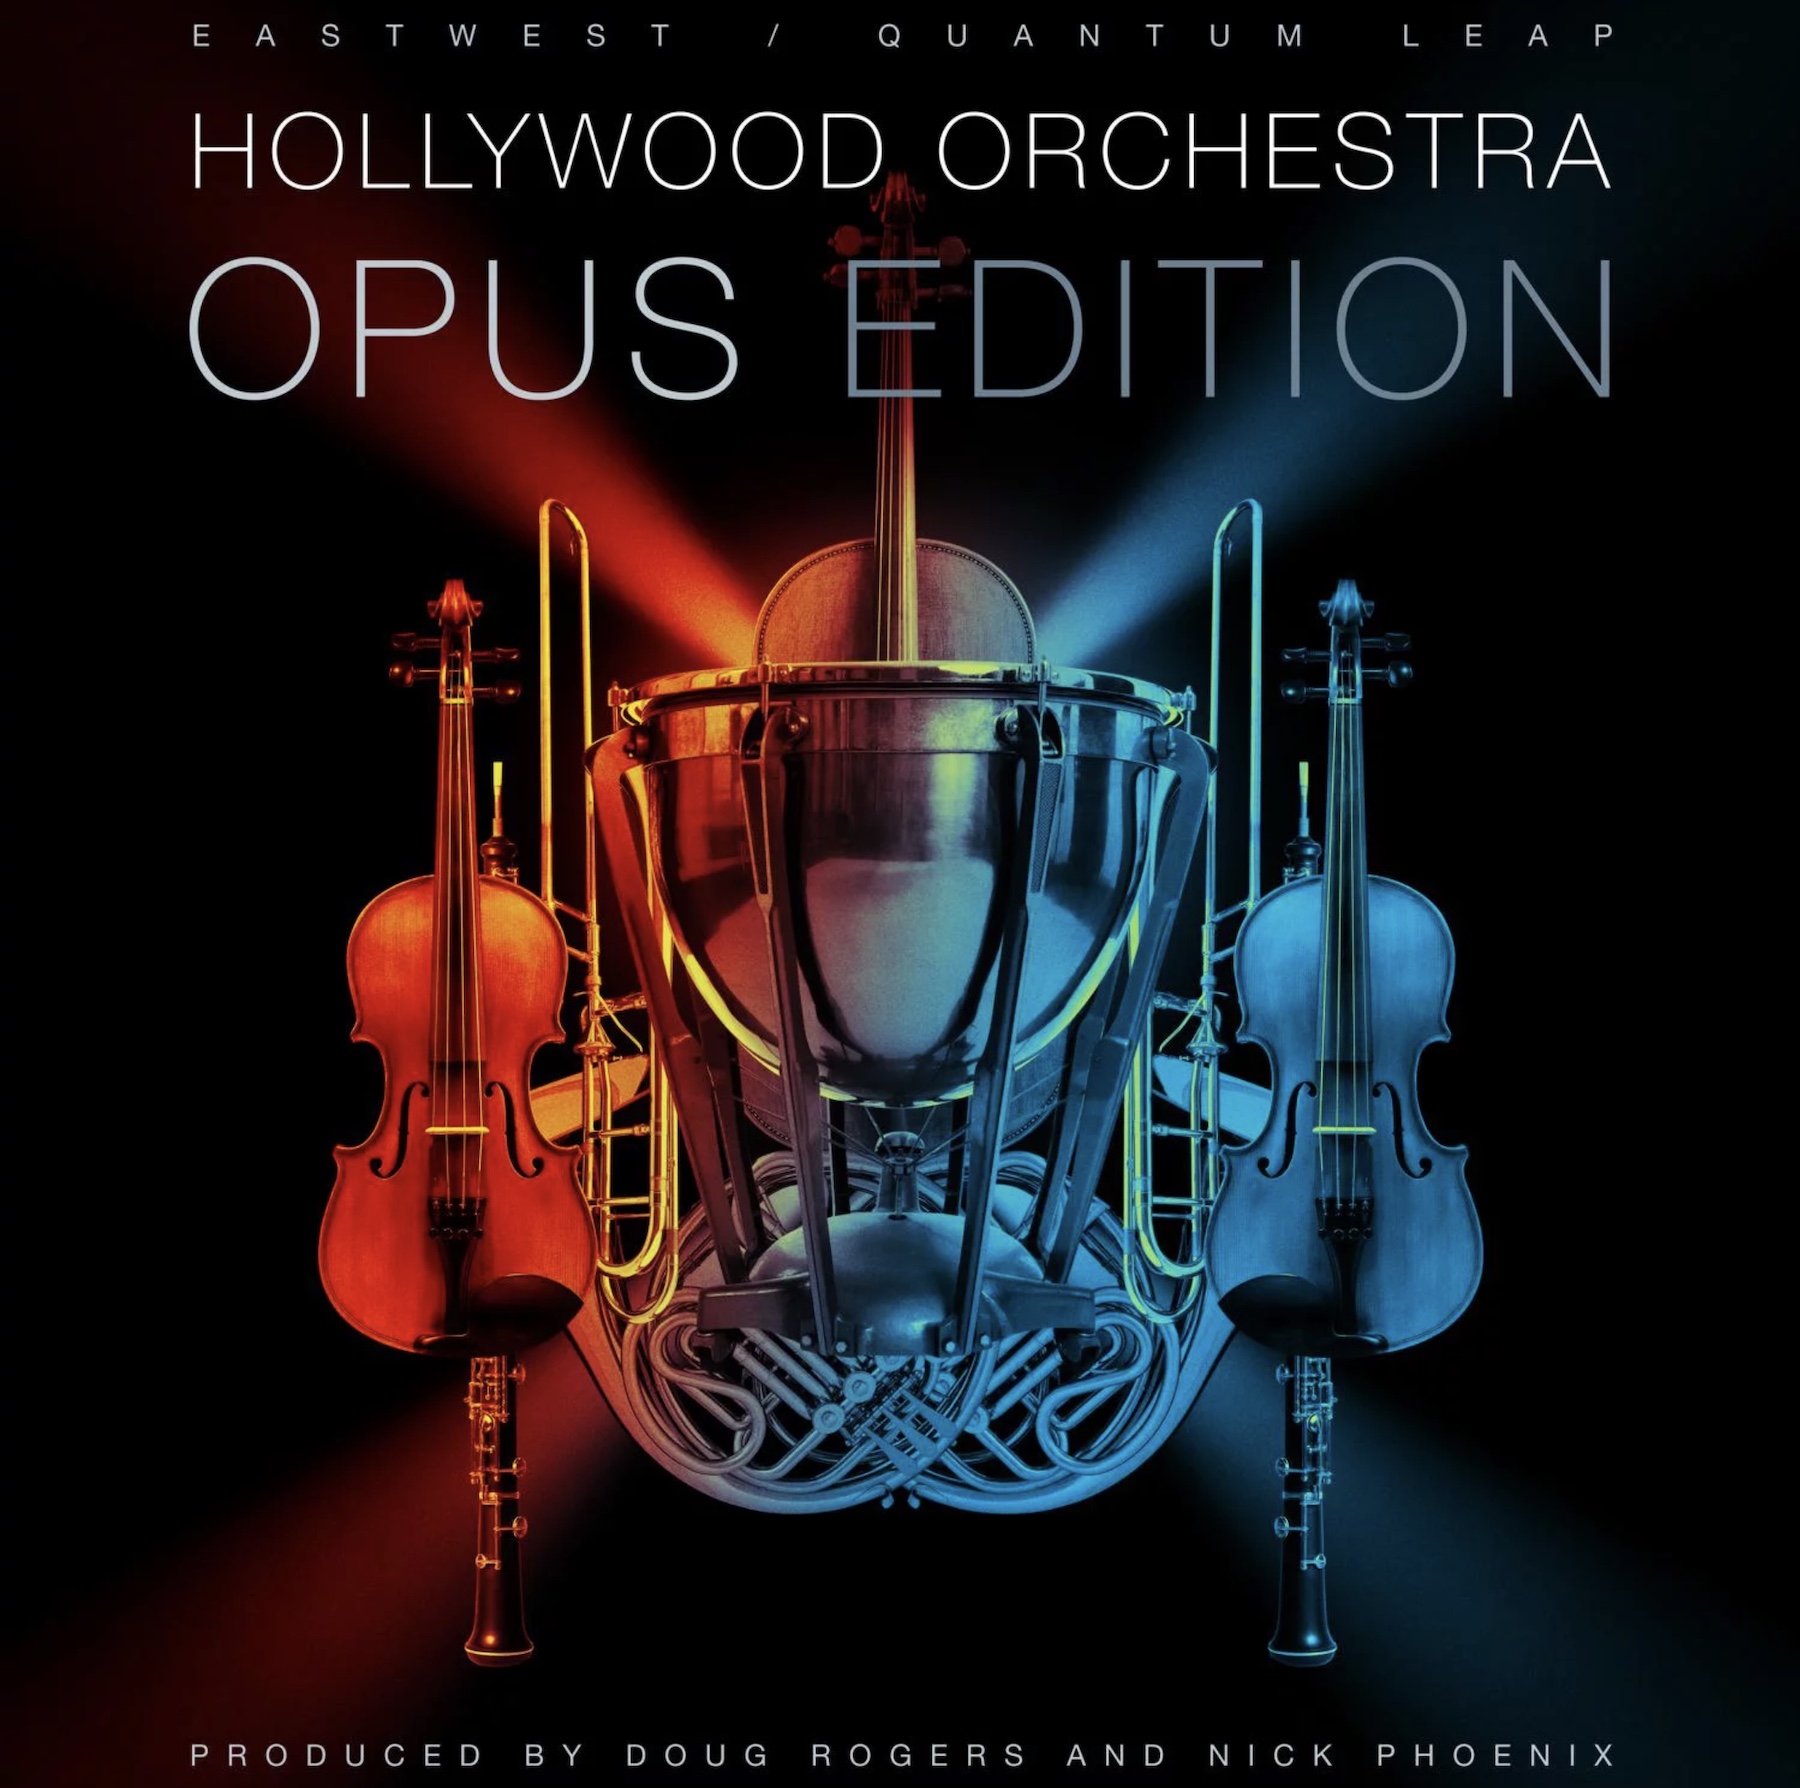 Software Review: Eastwest Hollywood Orchestra Opus Edition